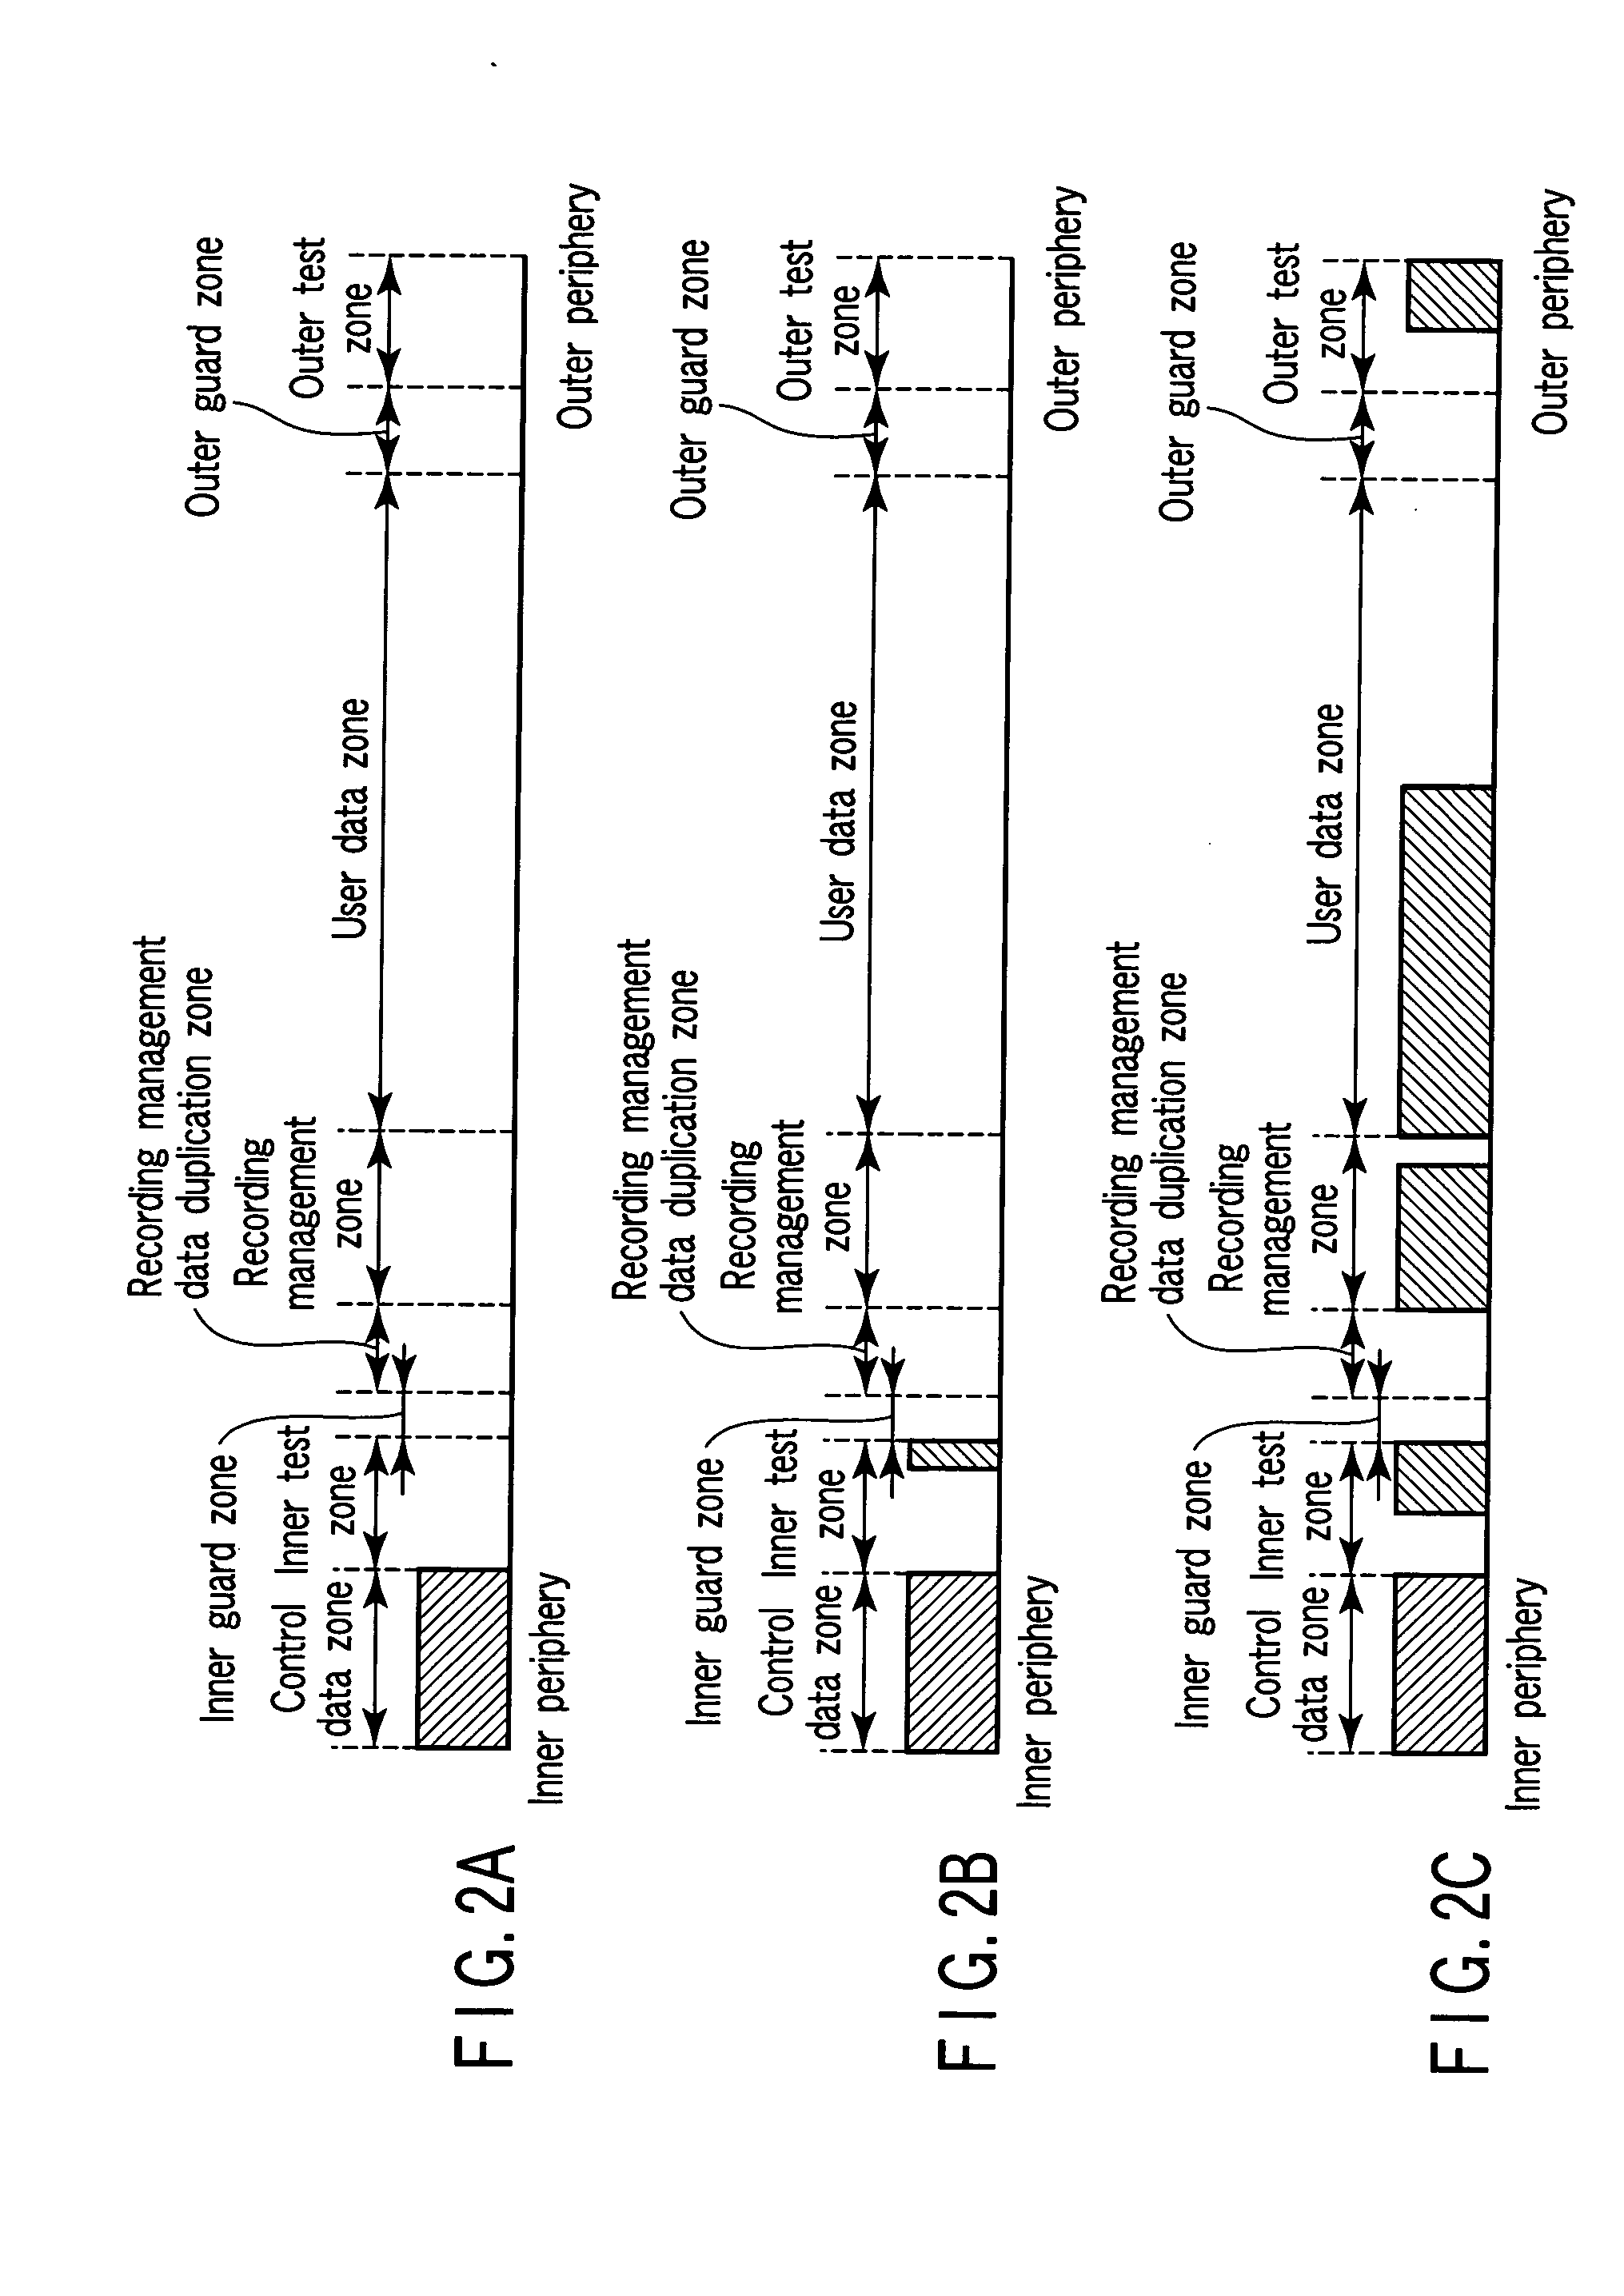 Optical disk, optical disk recording method, and optical disk recording apparatus